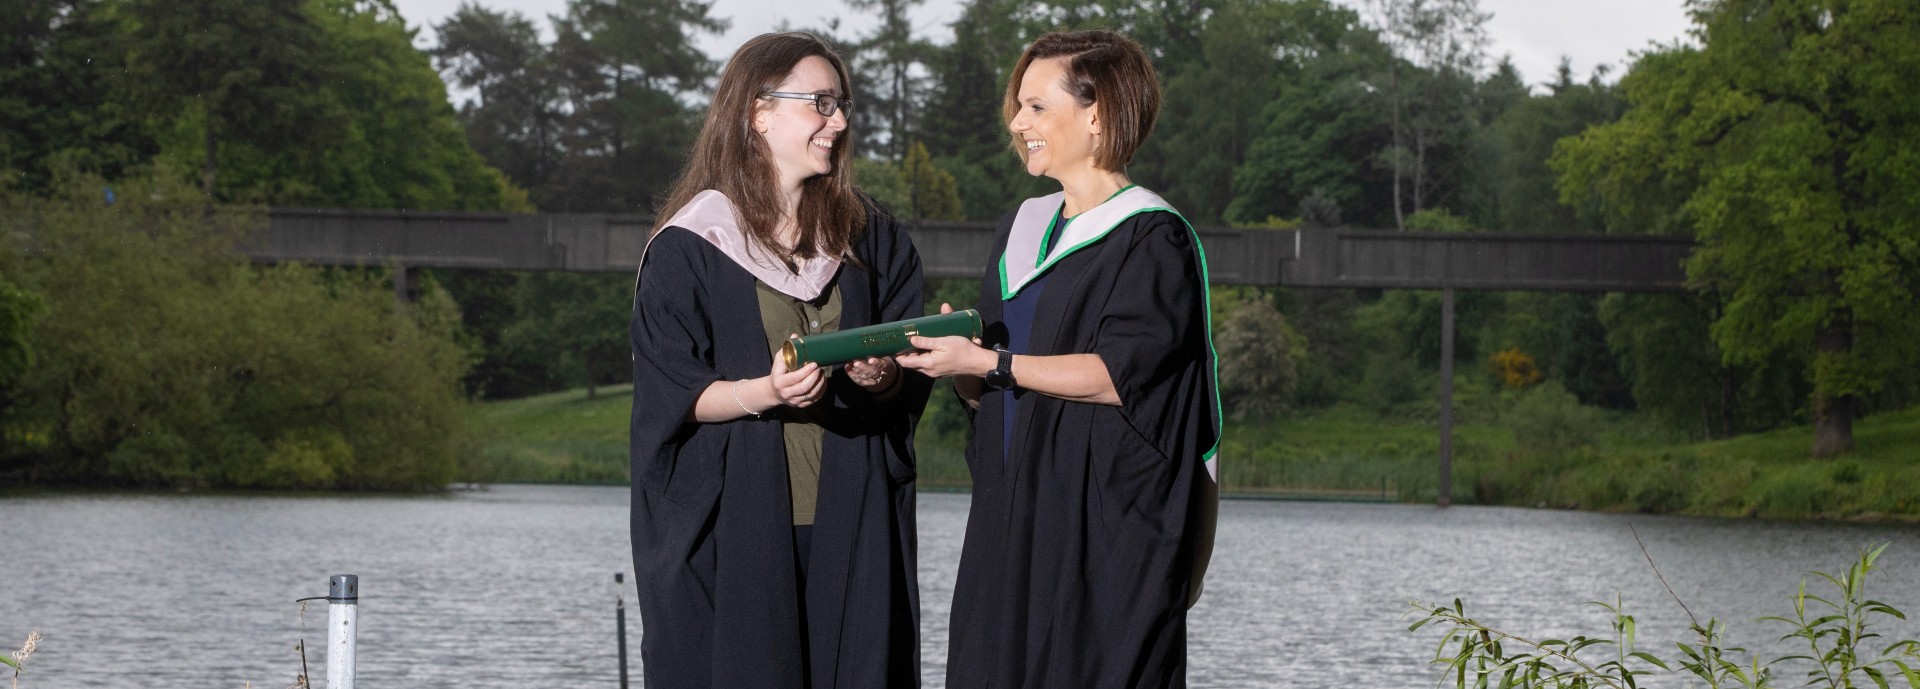 Vicki and Hannah Lawlor wear university graduations gowns and pose next to the loch on Stirling's campus